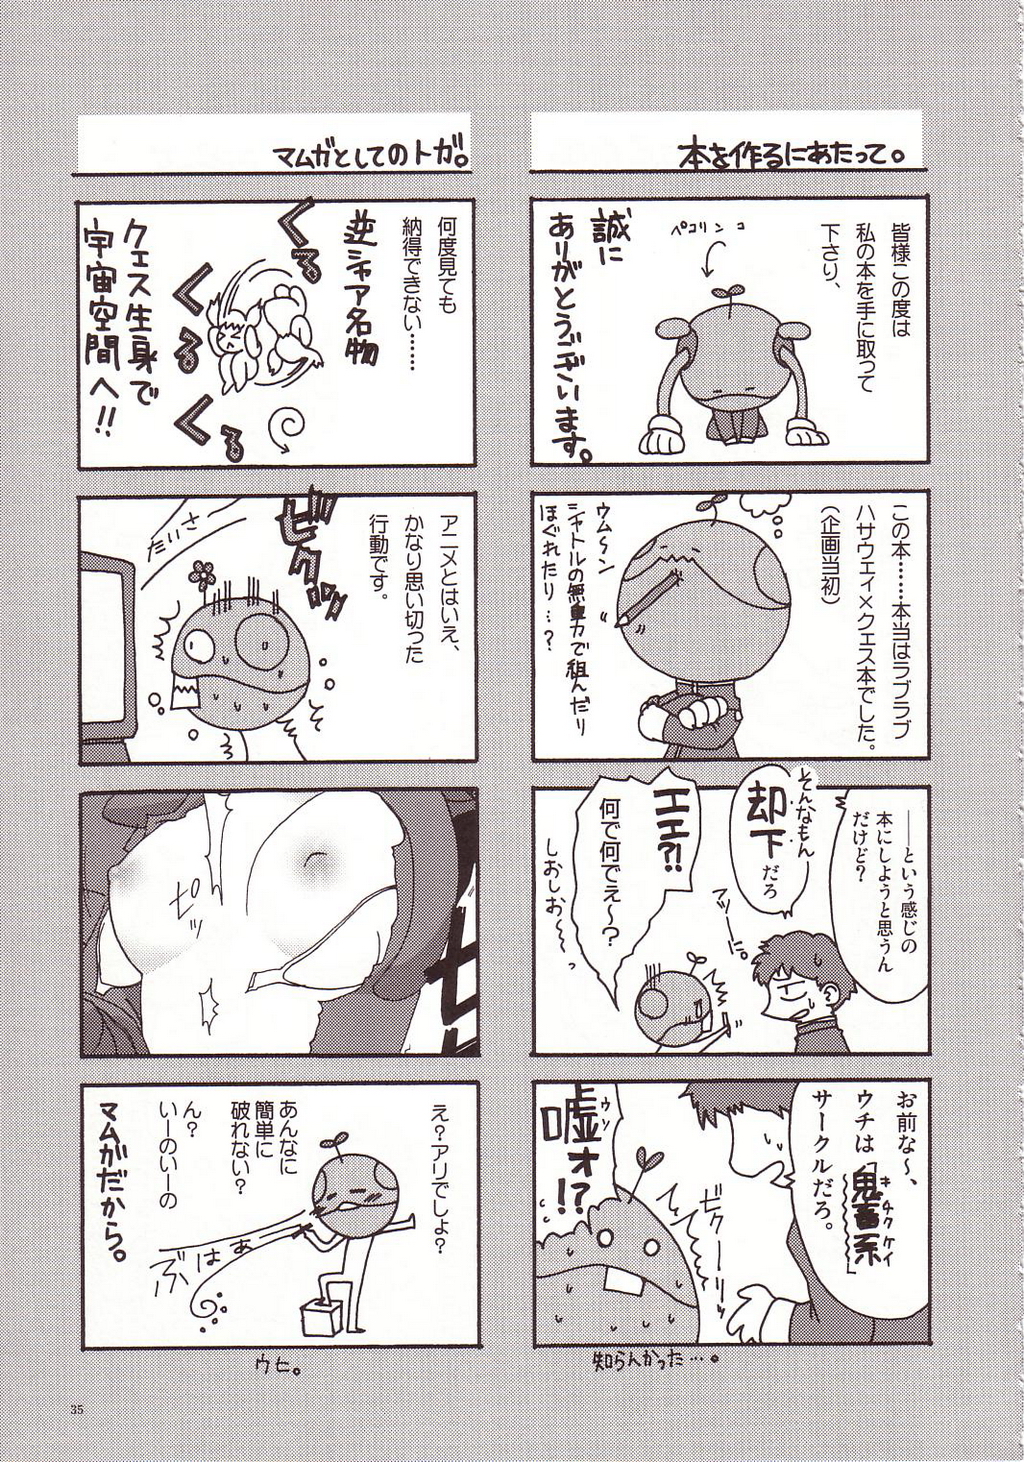 [AKABEi SOFT (Alpha)] Aishitai I WANT TO LOVE (Mobile Suit Gundam Char's Counterattack) page 34 full